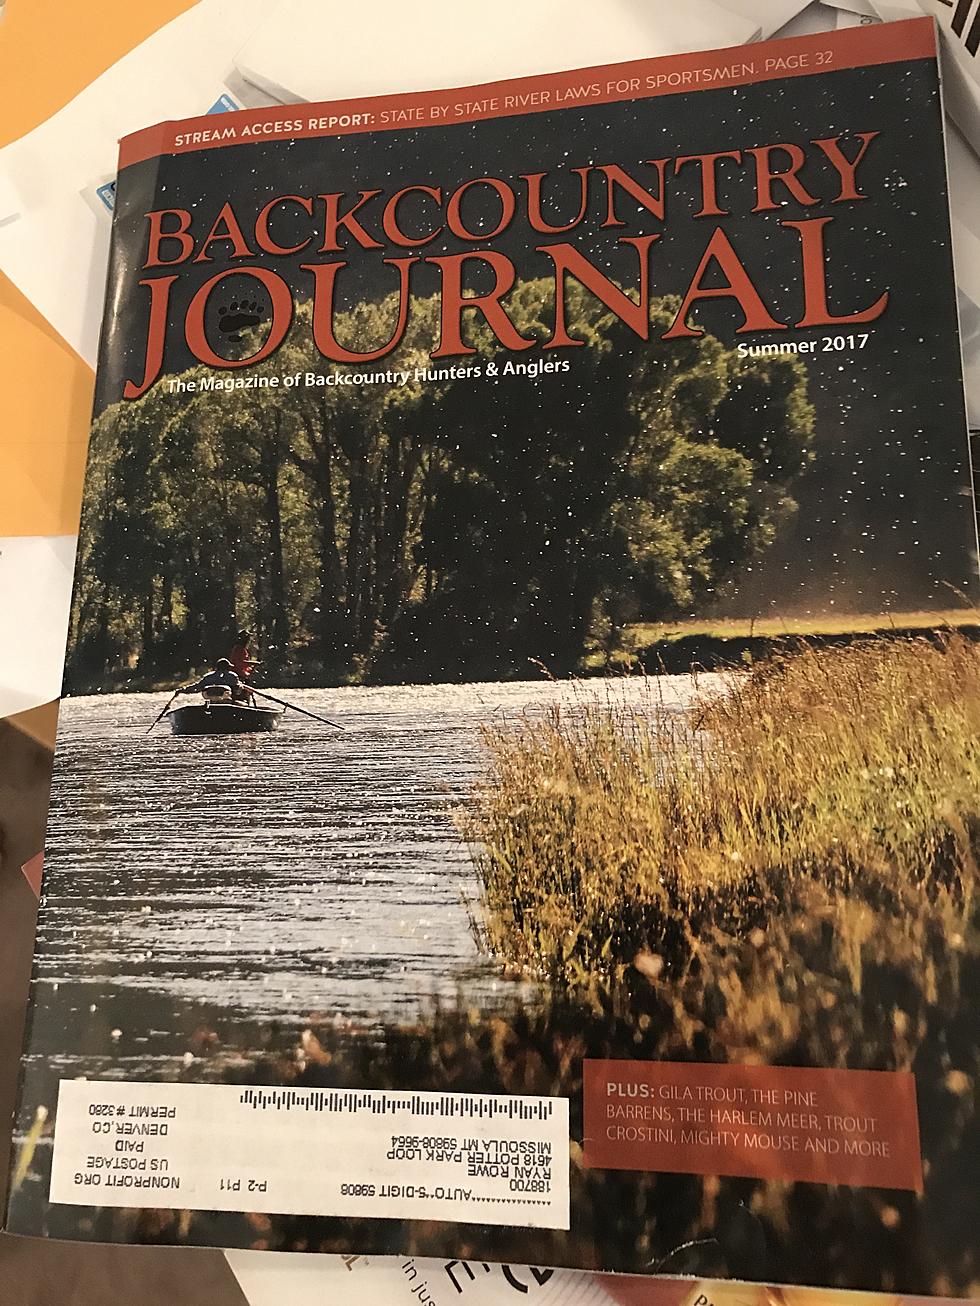 Honored and Excited to be Featured in the ‘Backcountry Journal ‘ Magazine